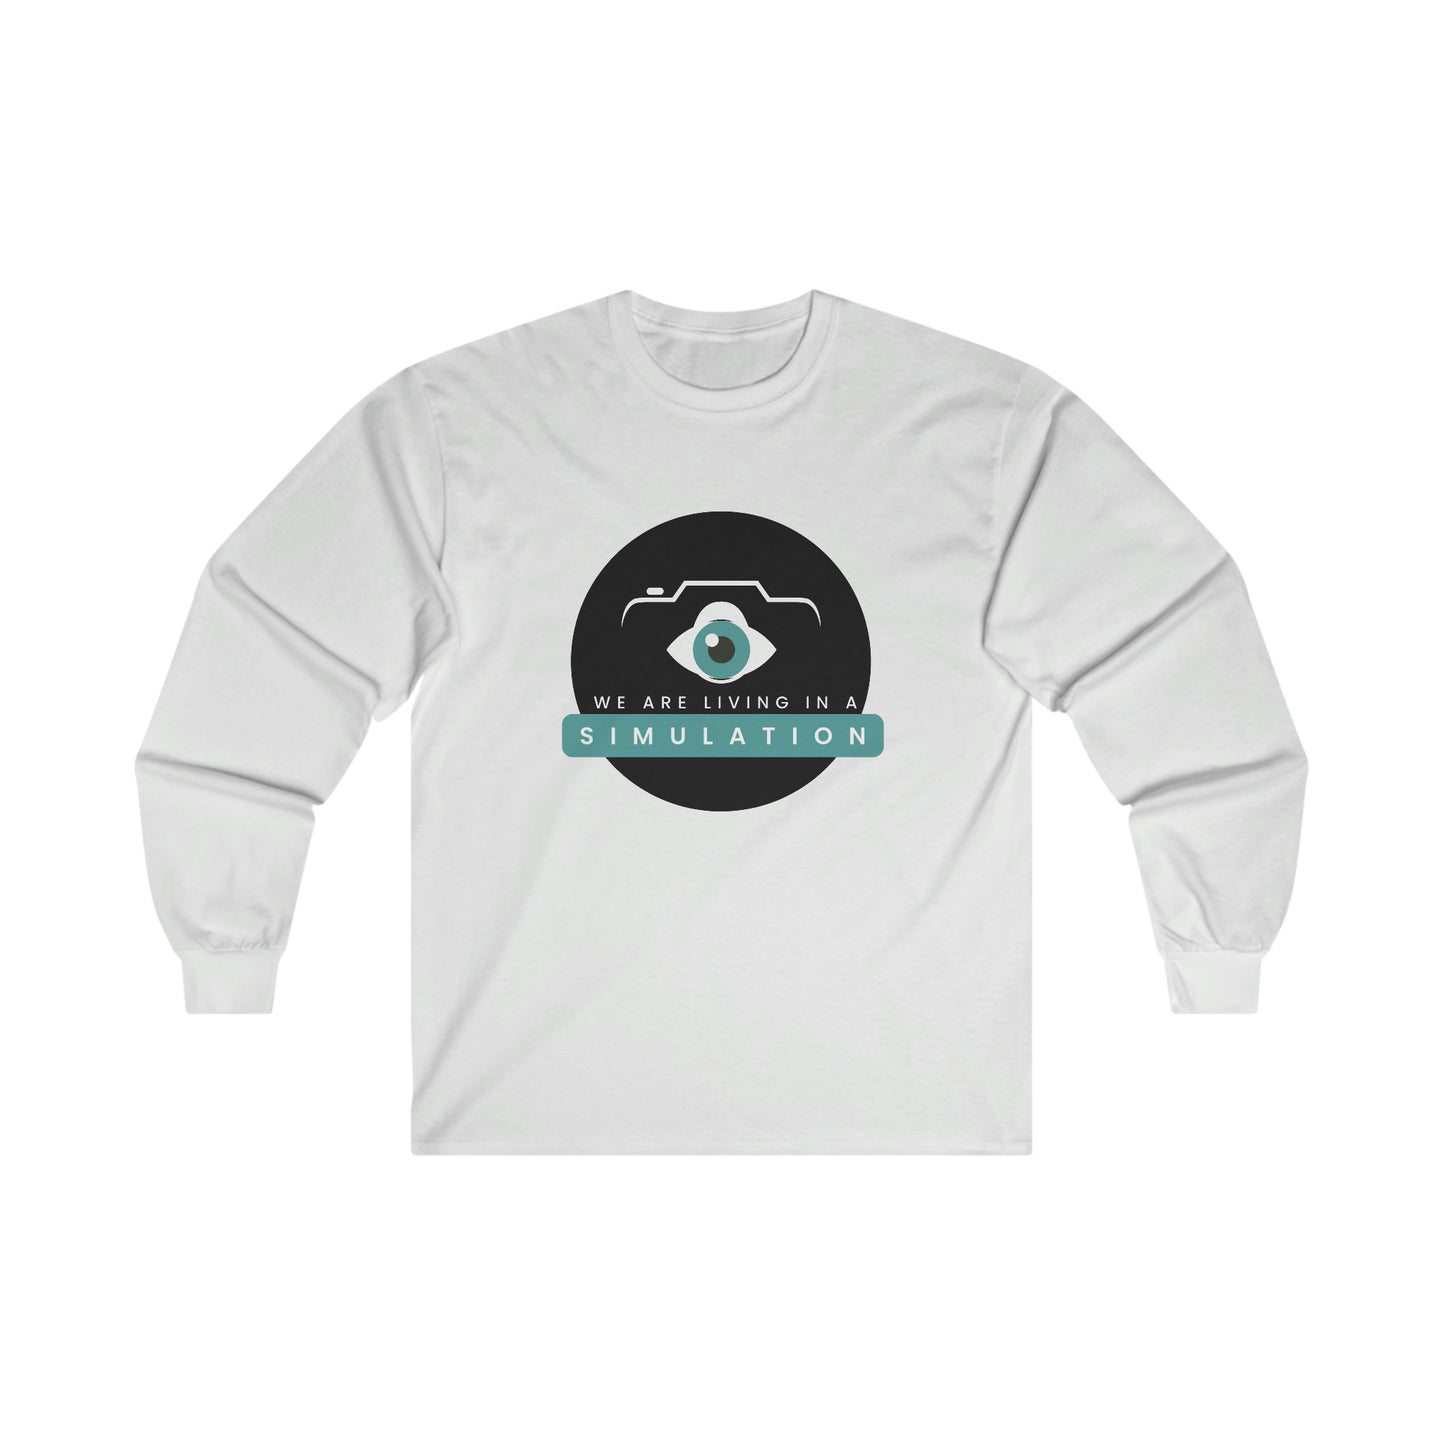 We Are In A Simulation  - Unisex Long Sleeve Tee